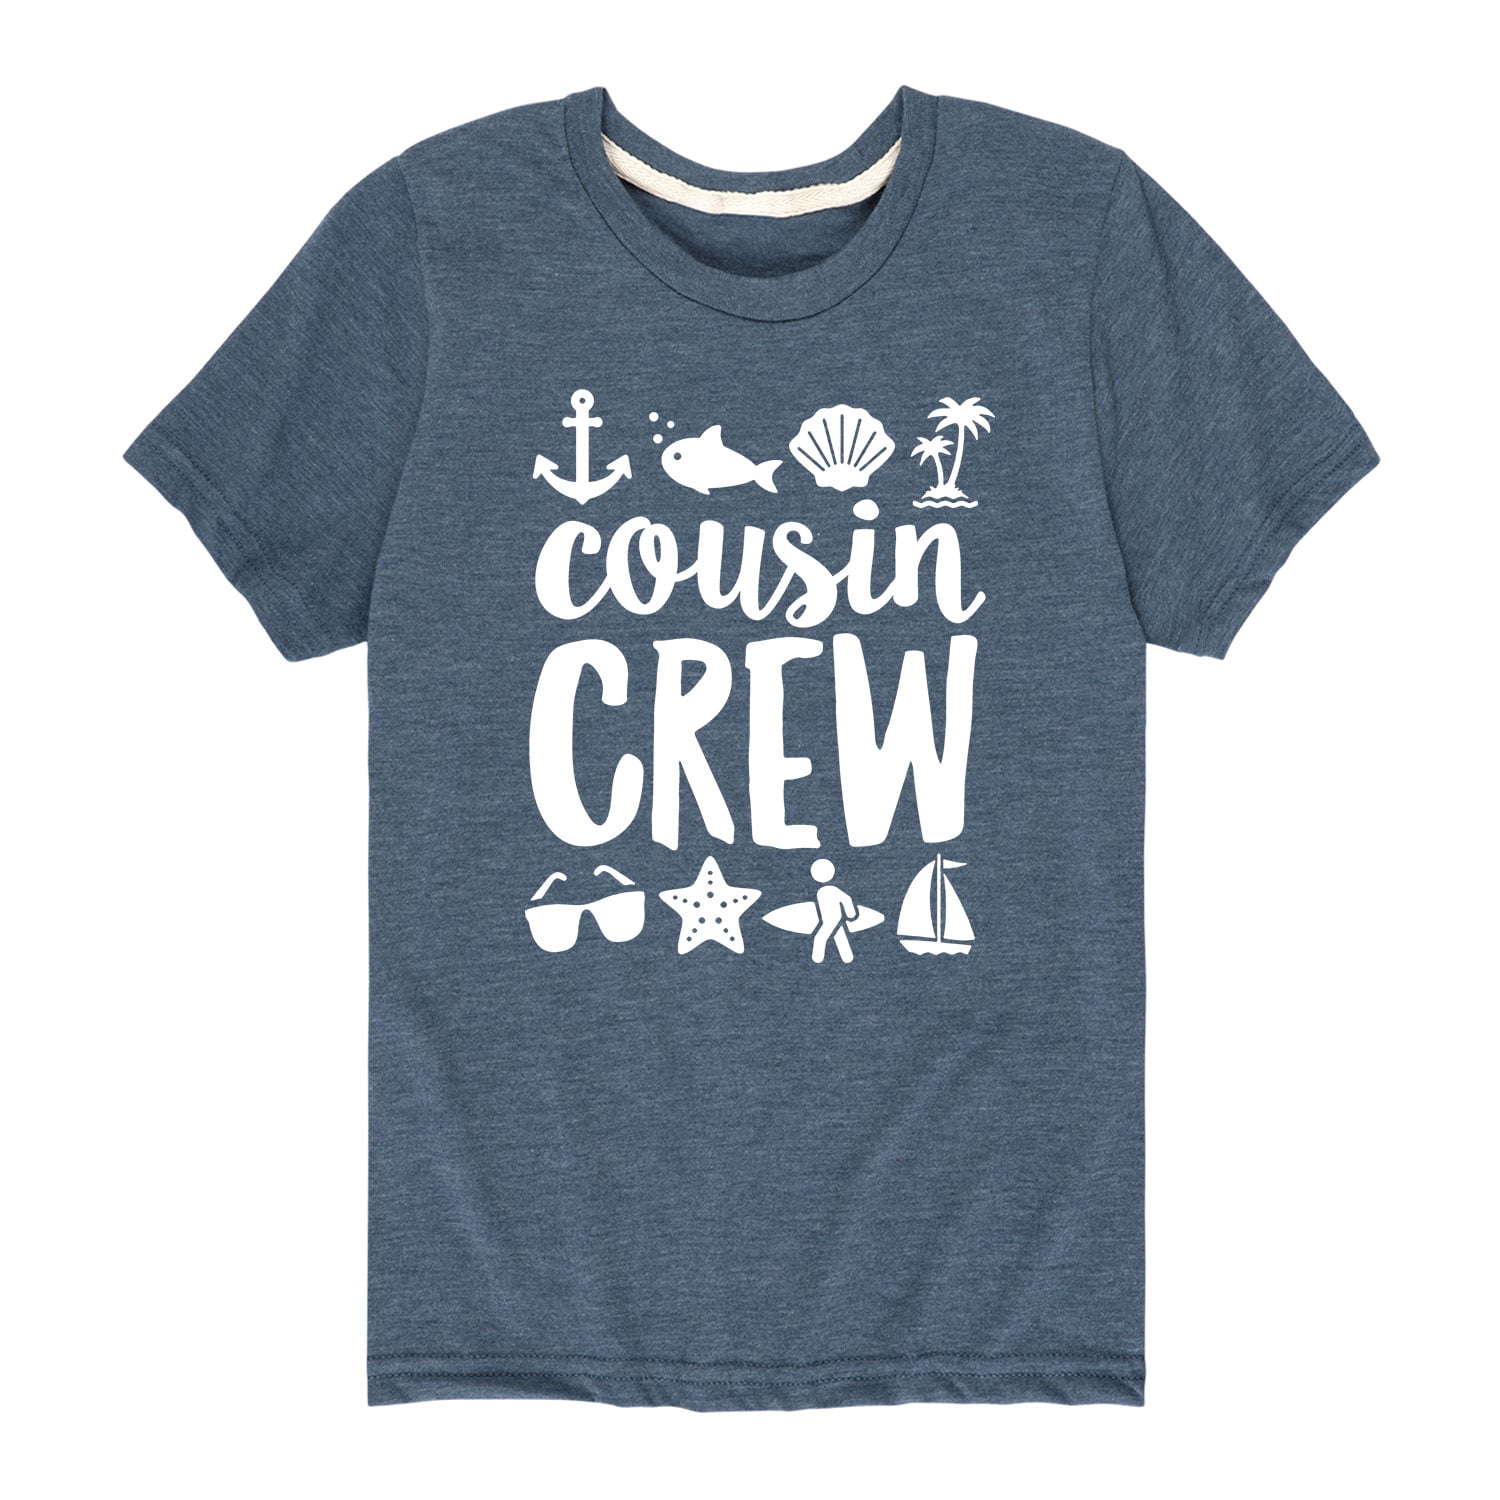 Message - Cousin Crew Beach - Toddler And Youth Short Sleeve Graphic T-Shirt - Walmart.com